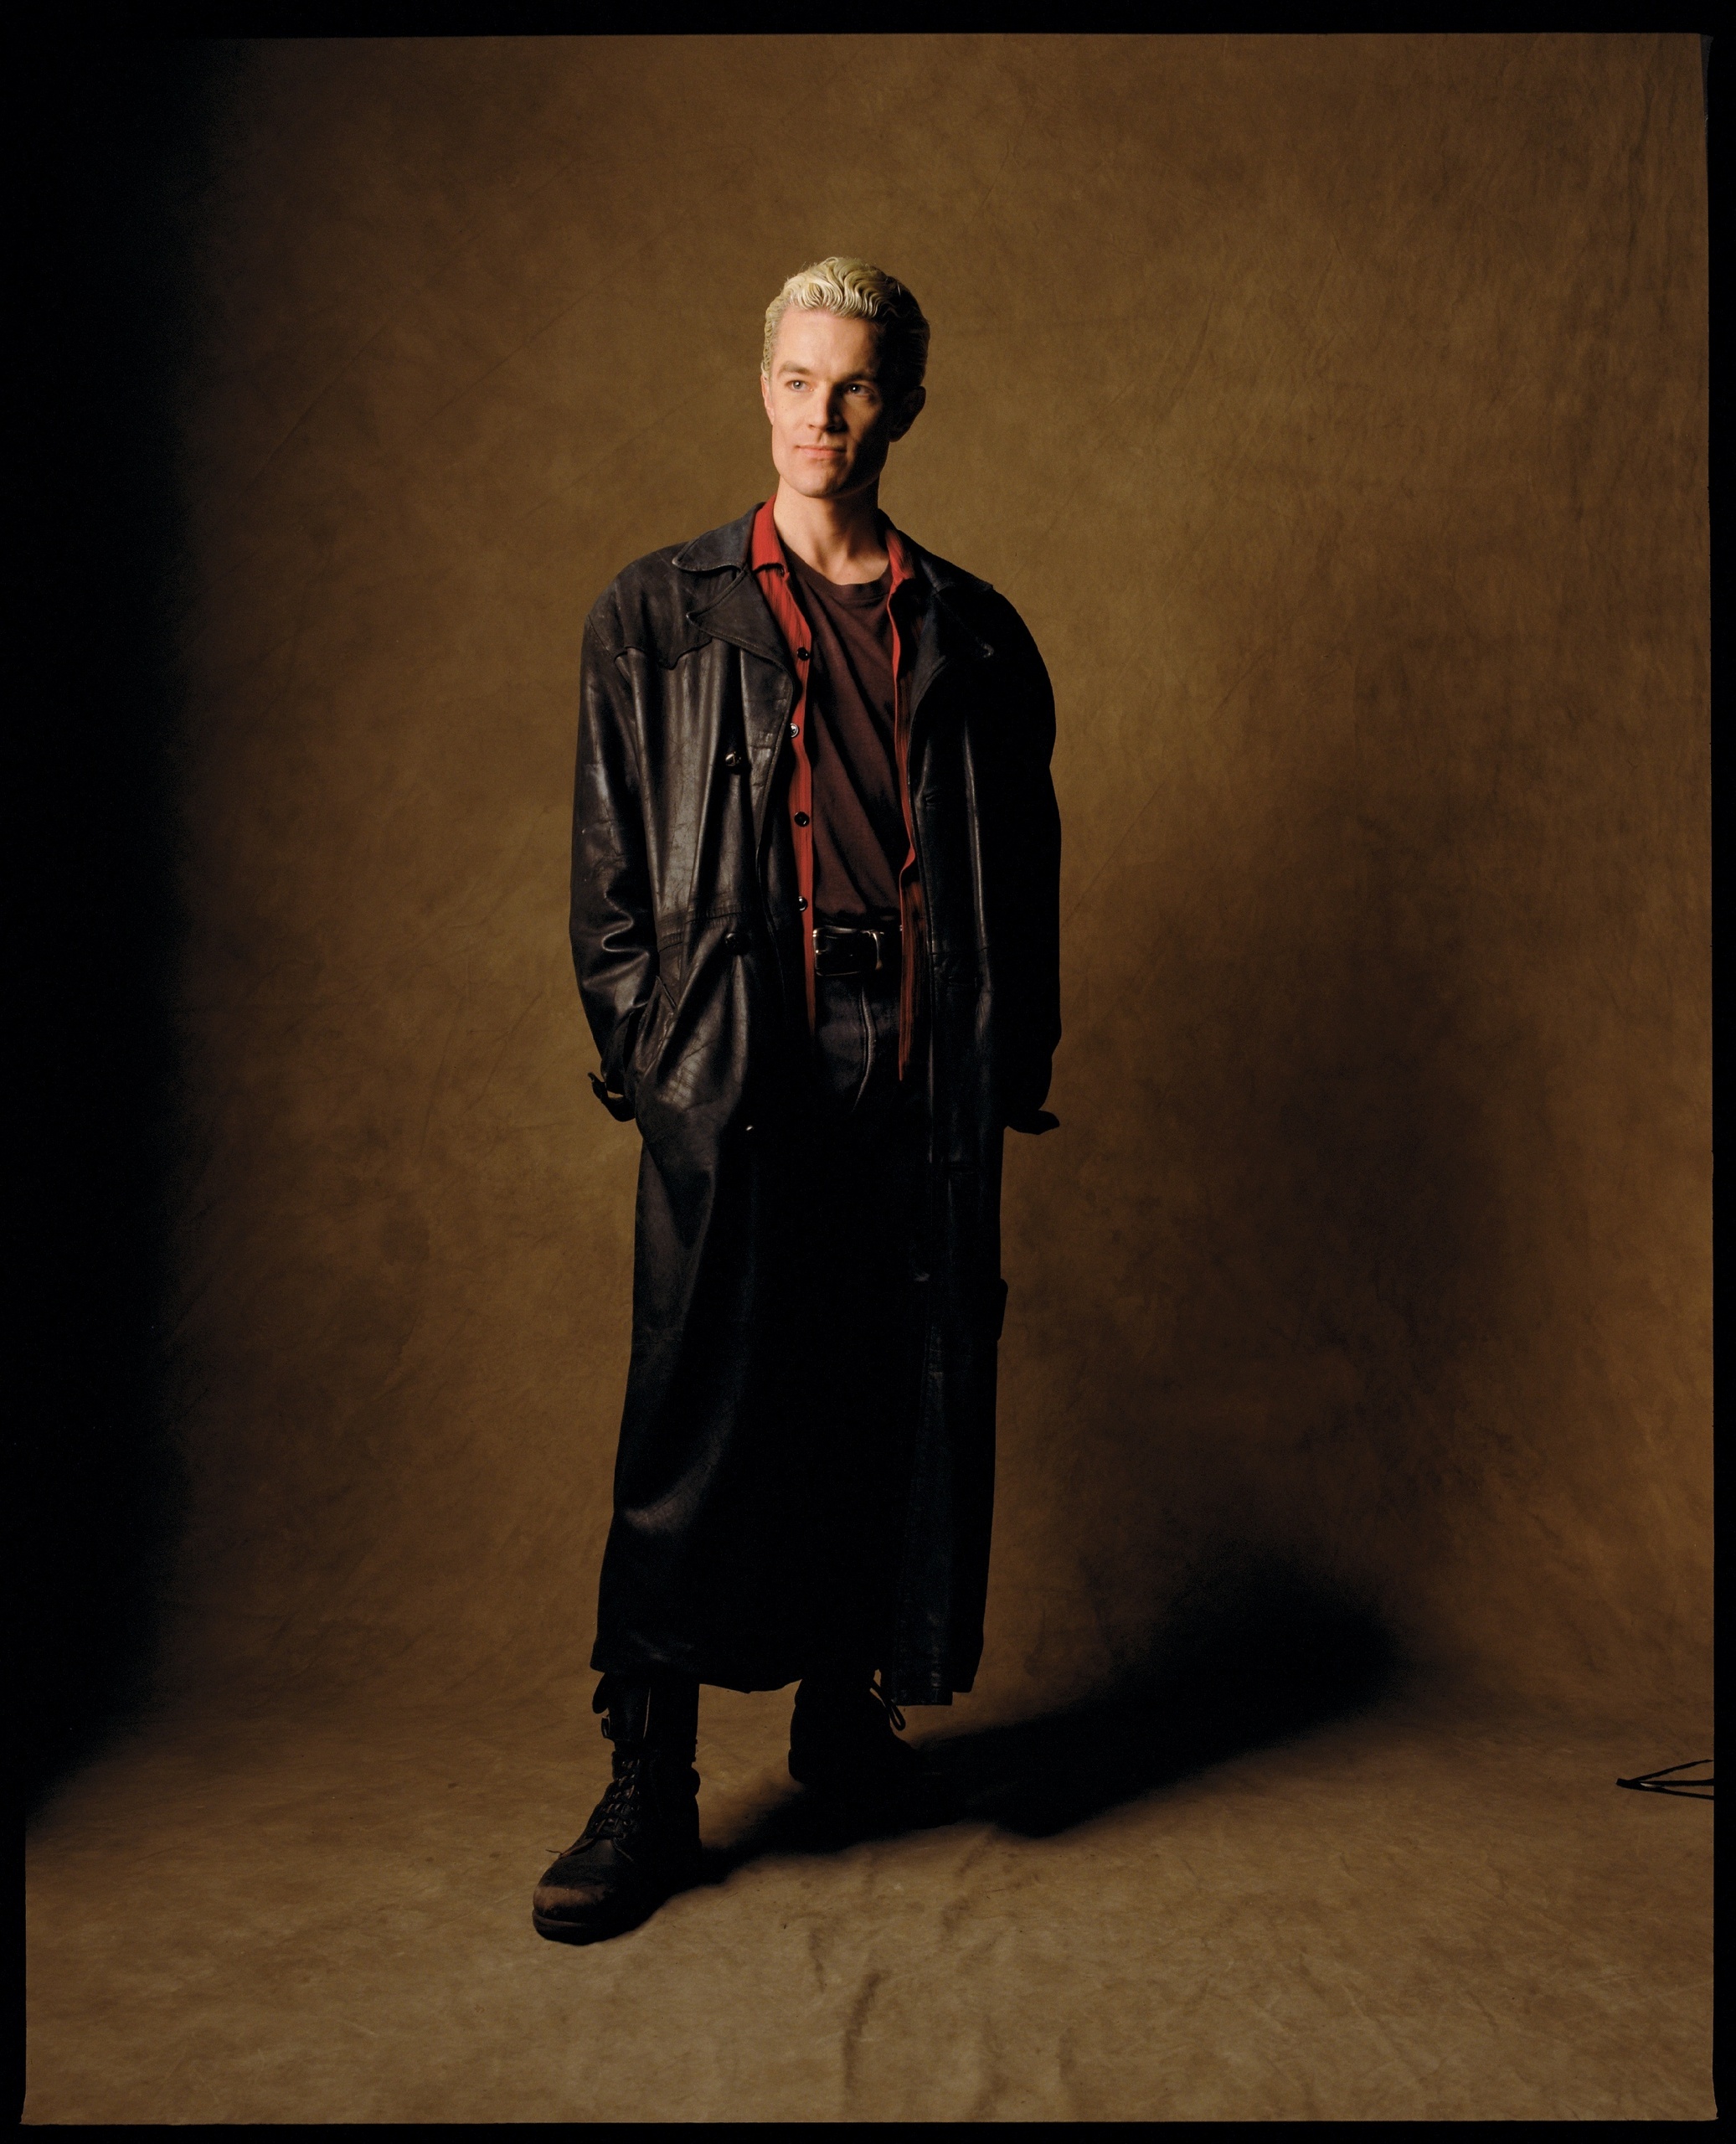 spike from buffy